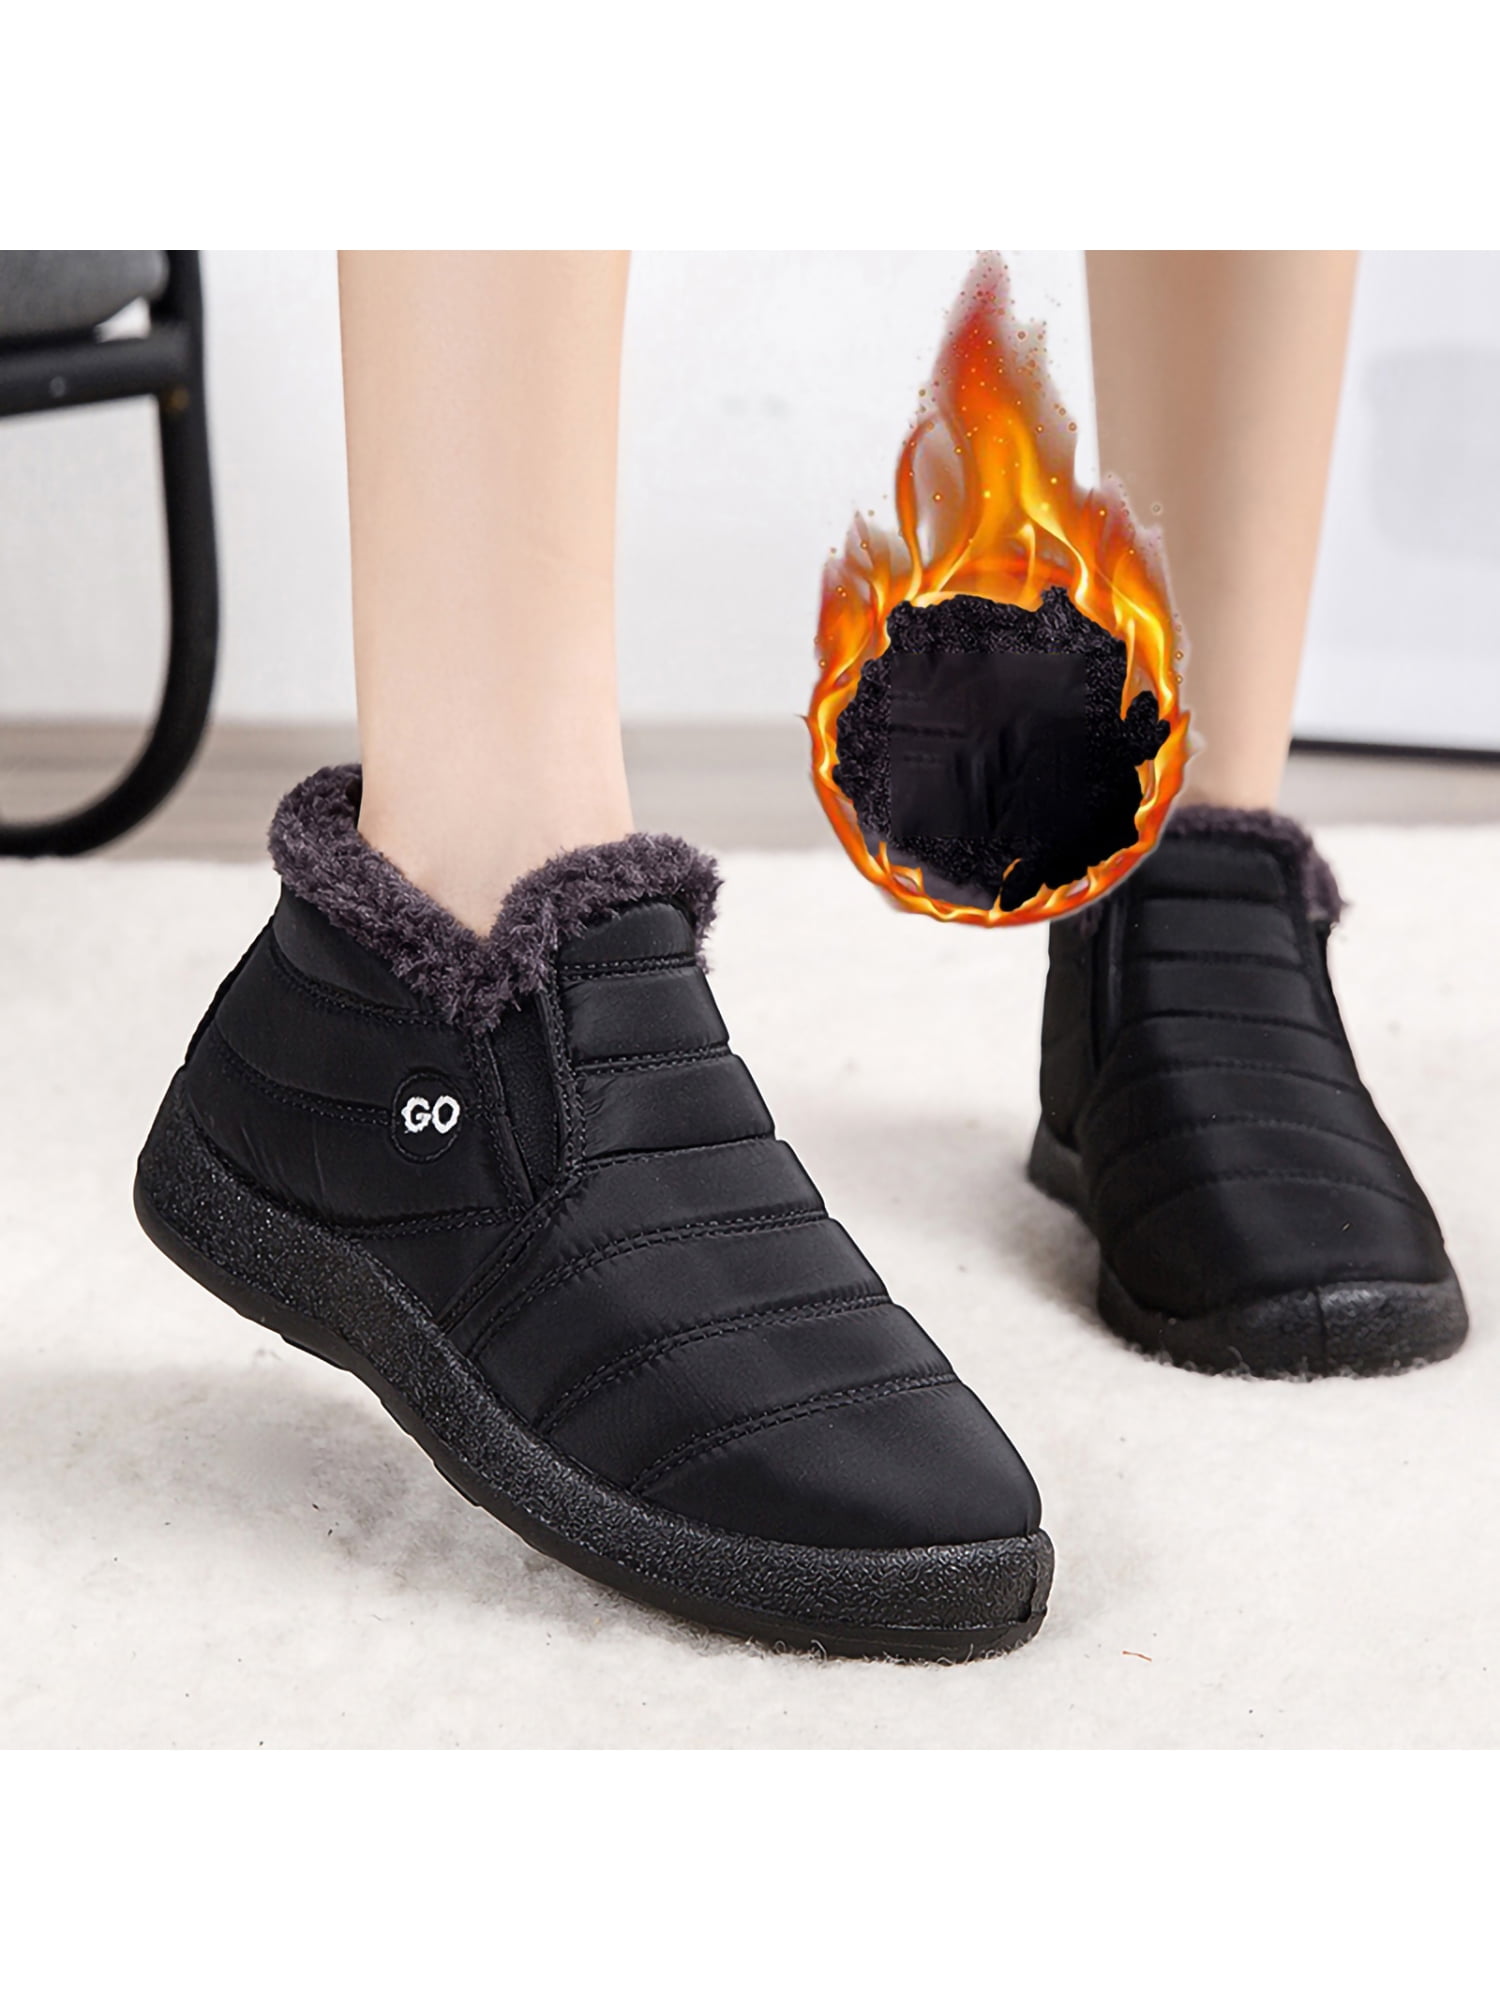 Women's Scrub Plush Mid-Calf Boots Winter Snow Warm Flats Casual Ankle Boots New 